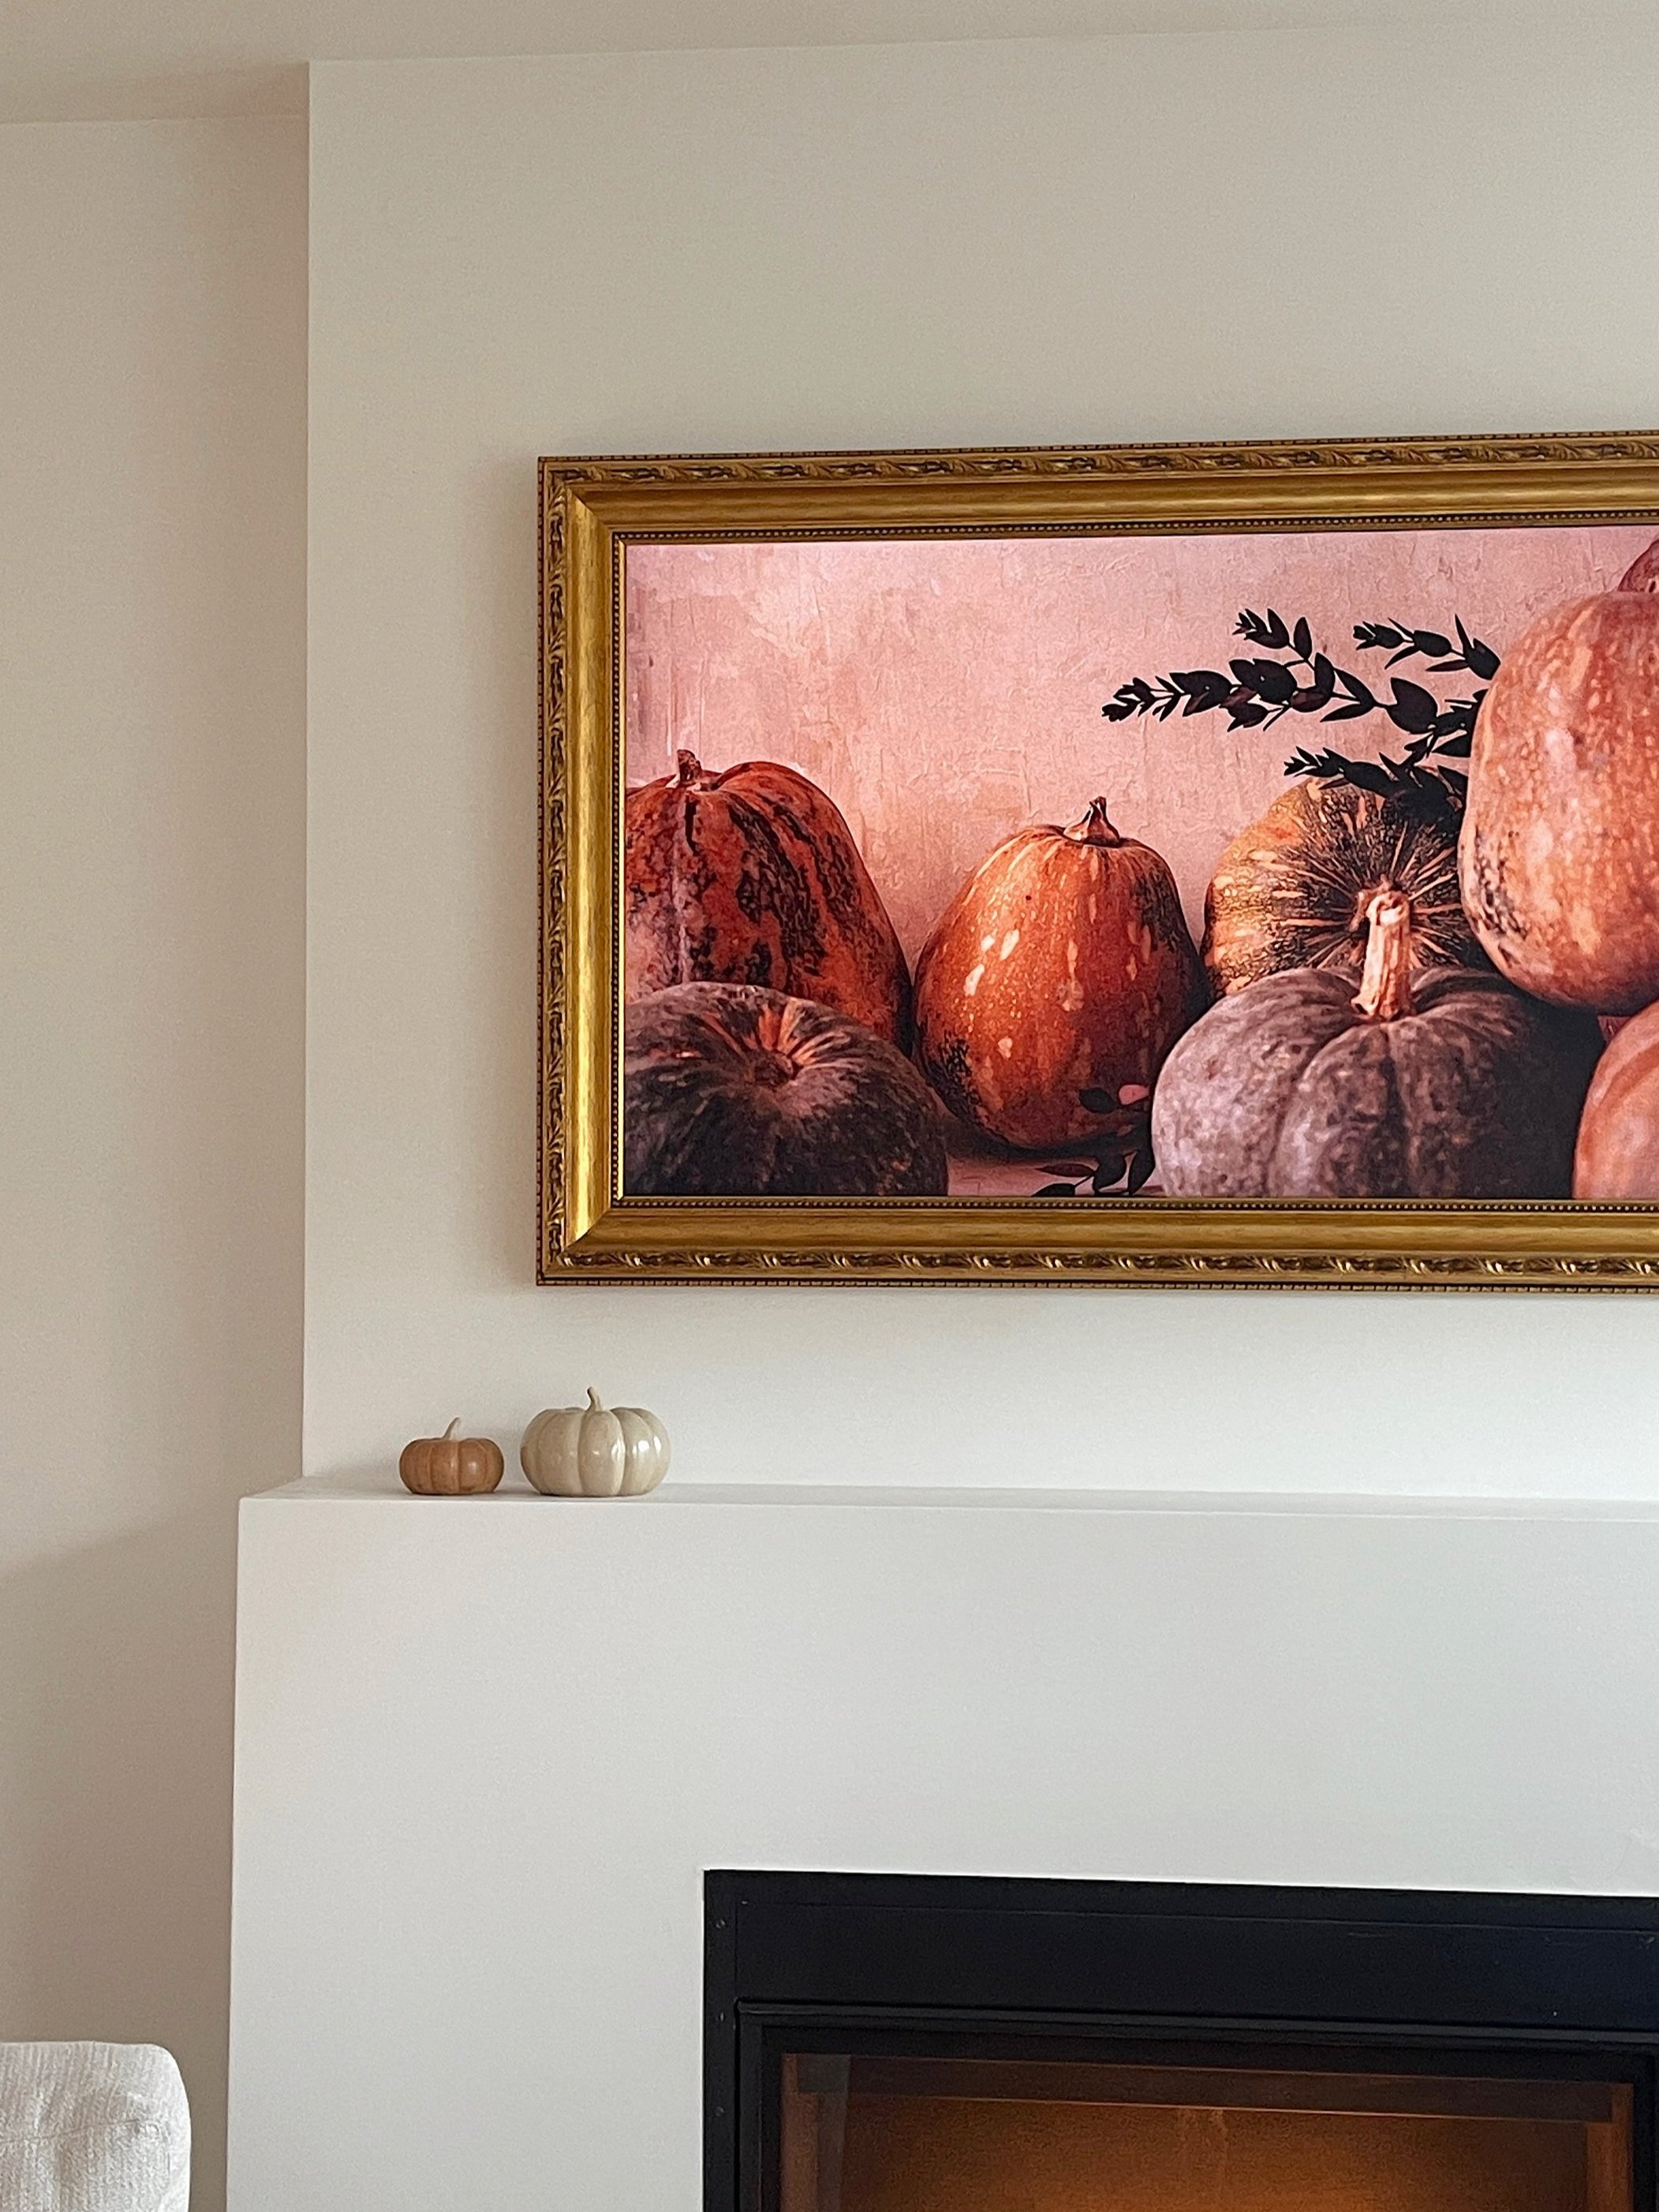 TV That Looks Like a Painting: My Honest Frame TV Review - Caitlin